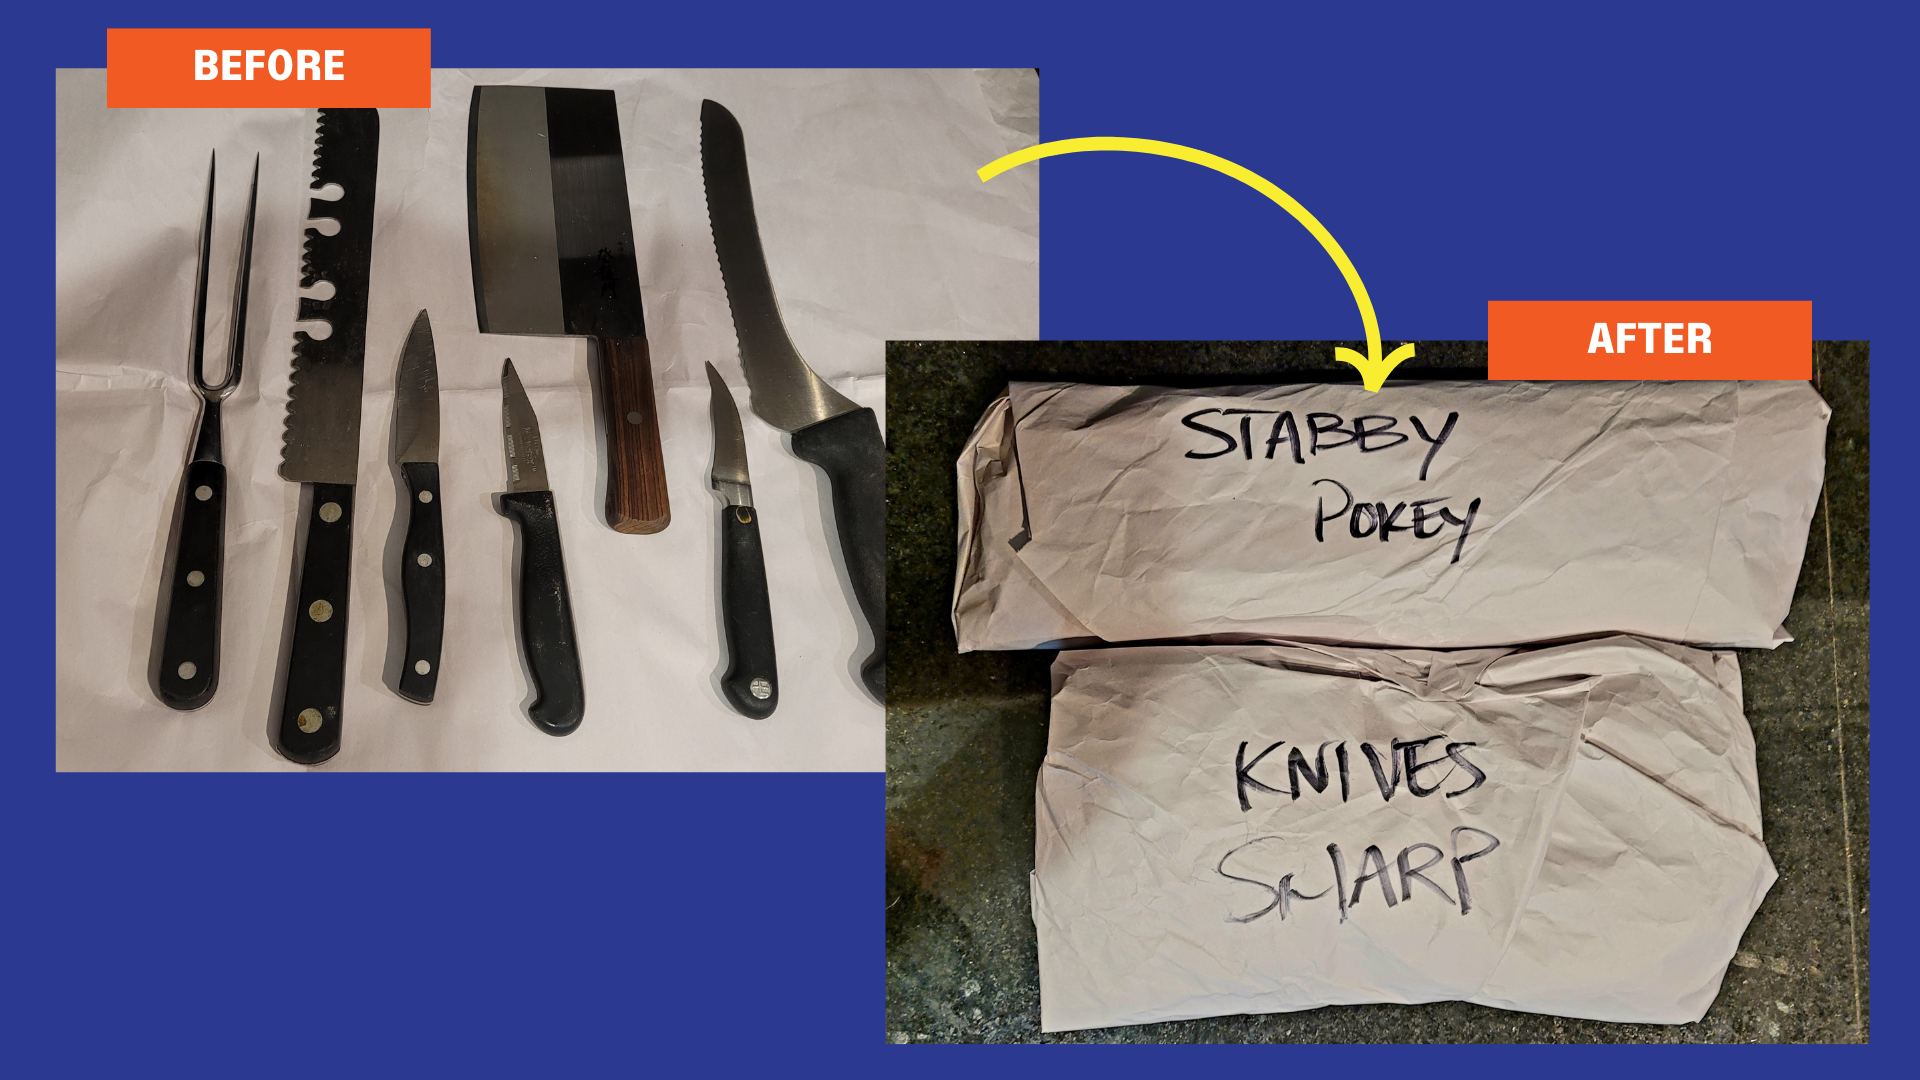 Before and after of safely packing knives. The knives are wrapped in paper and separated by type.